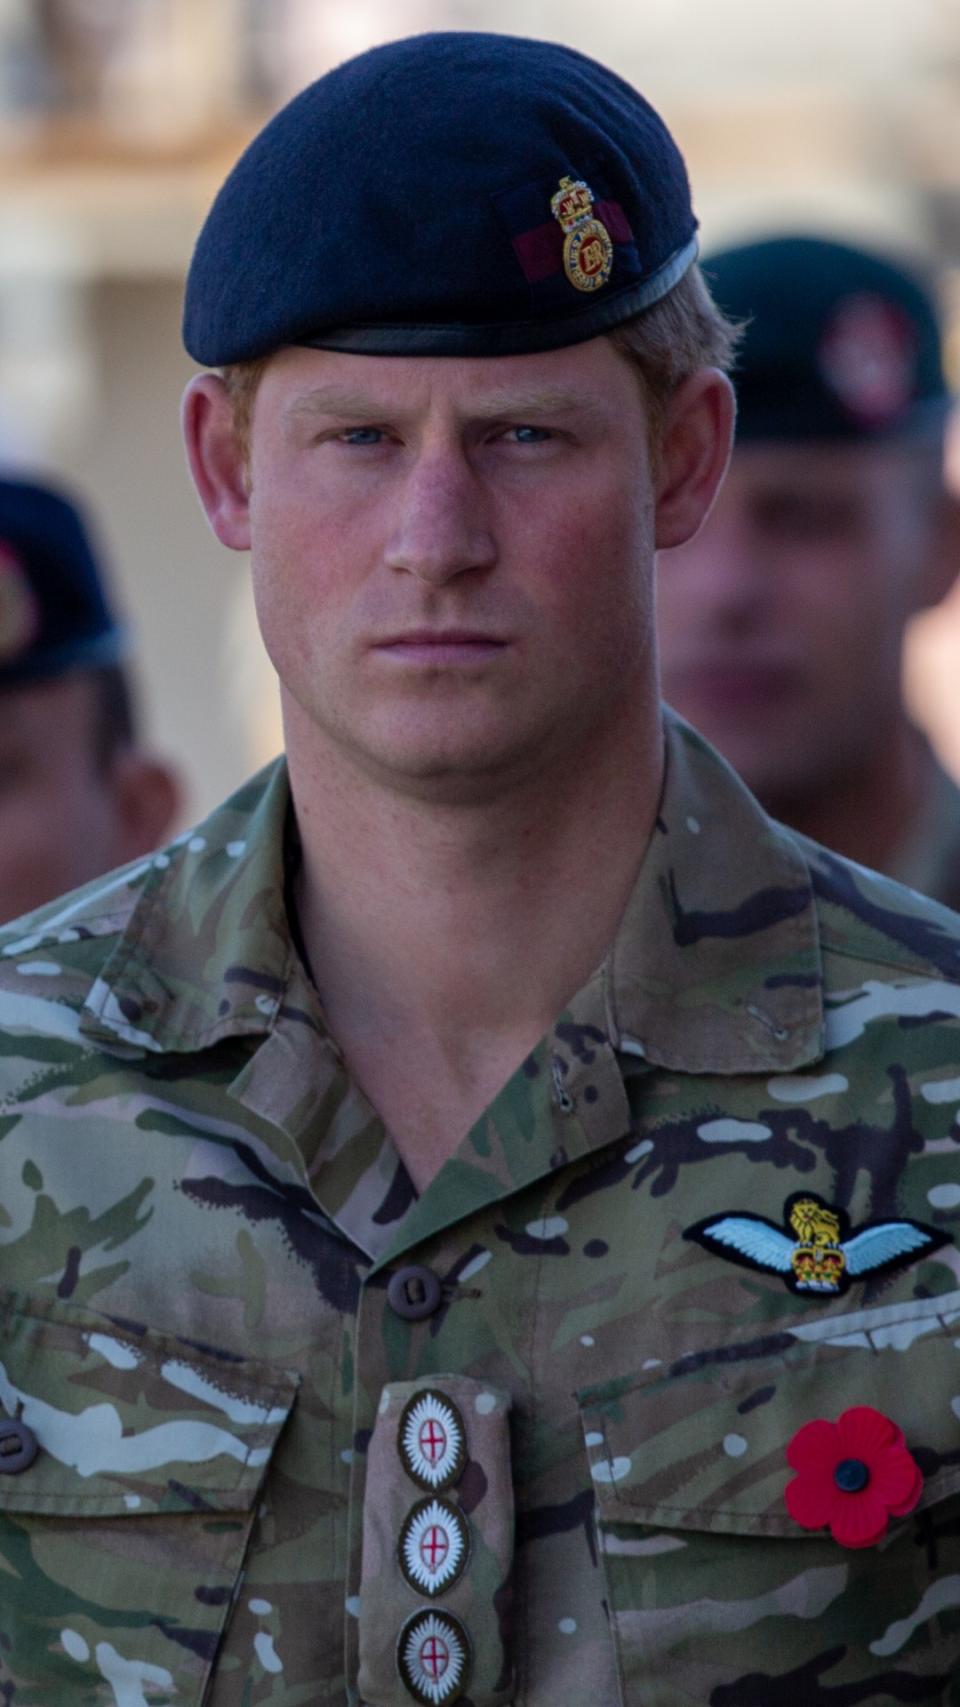 Prince Harry while in the army